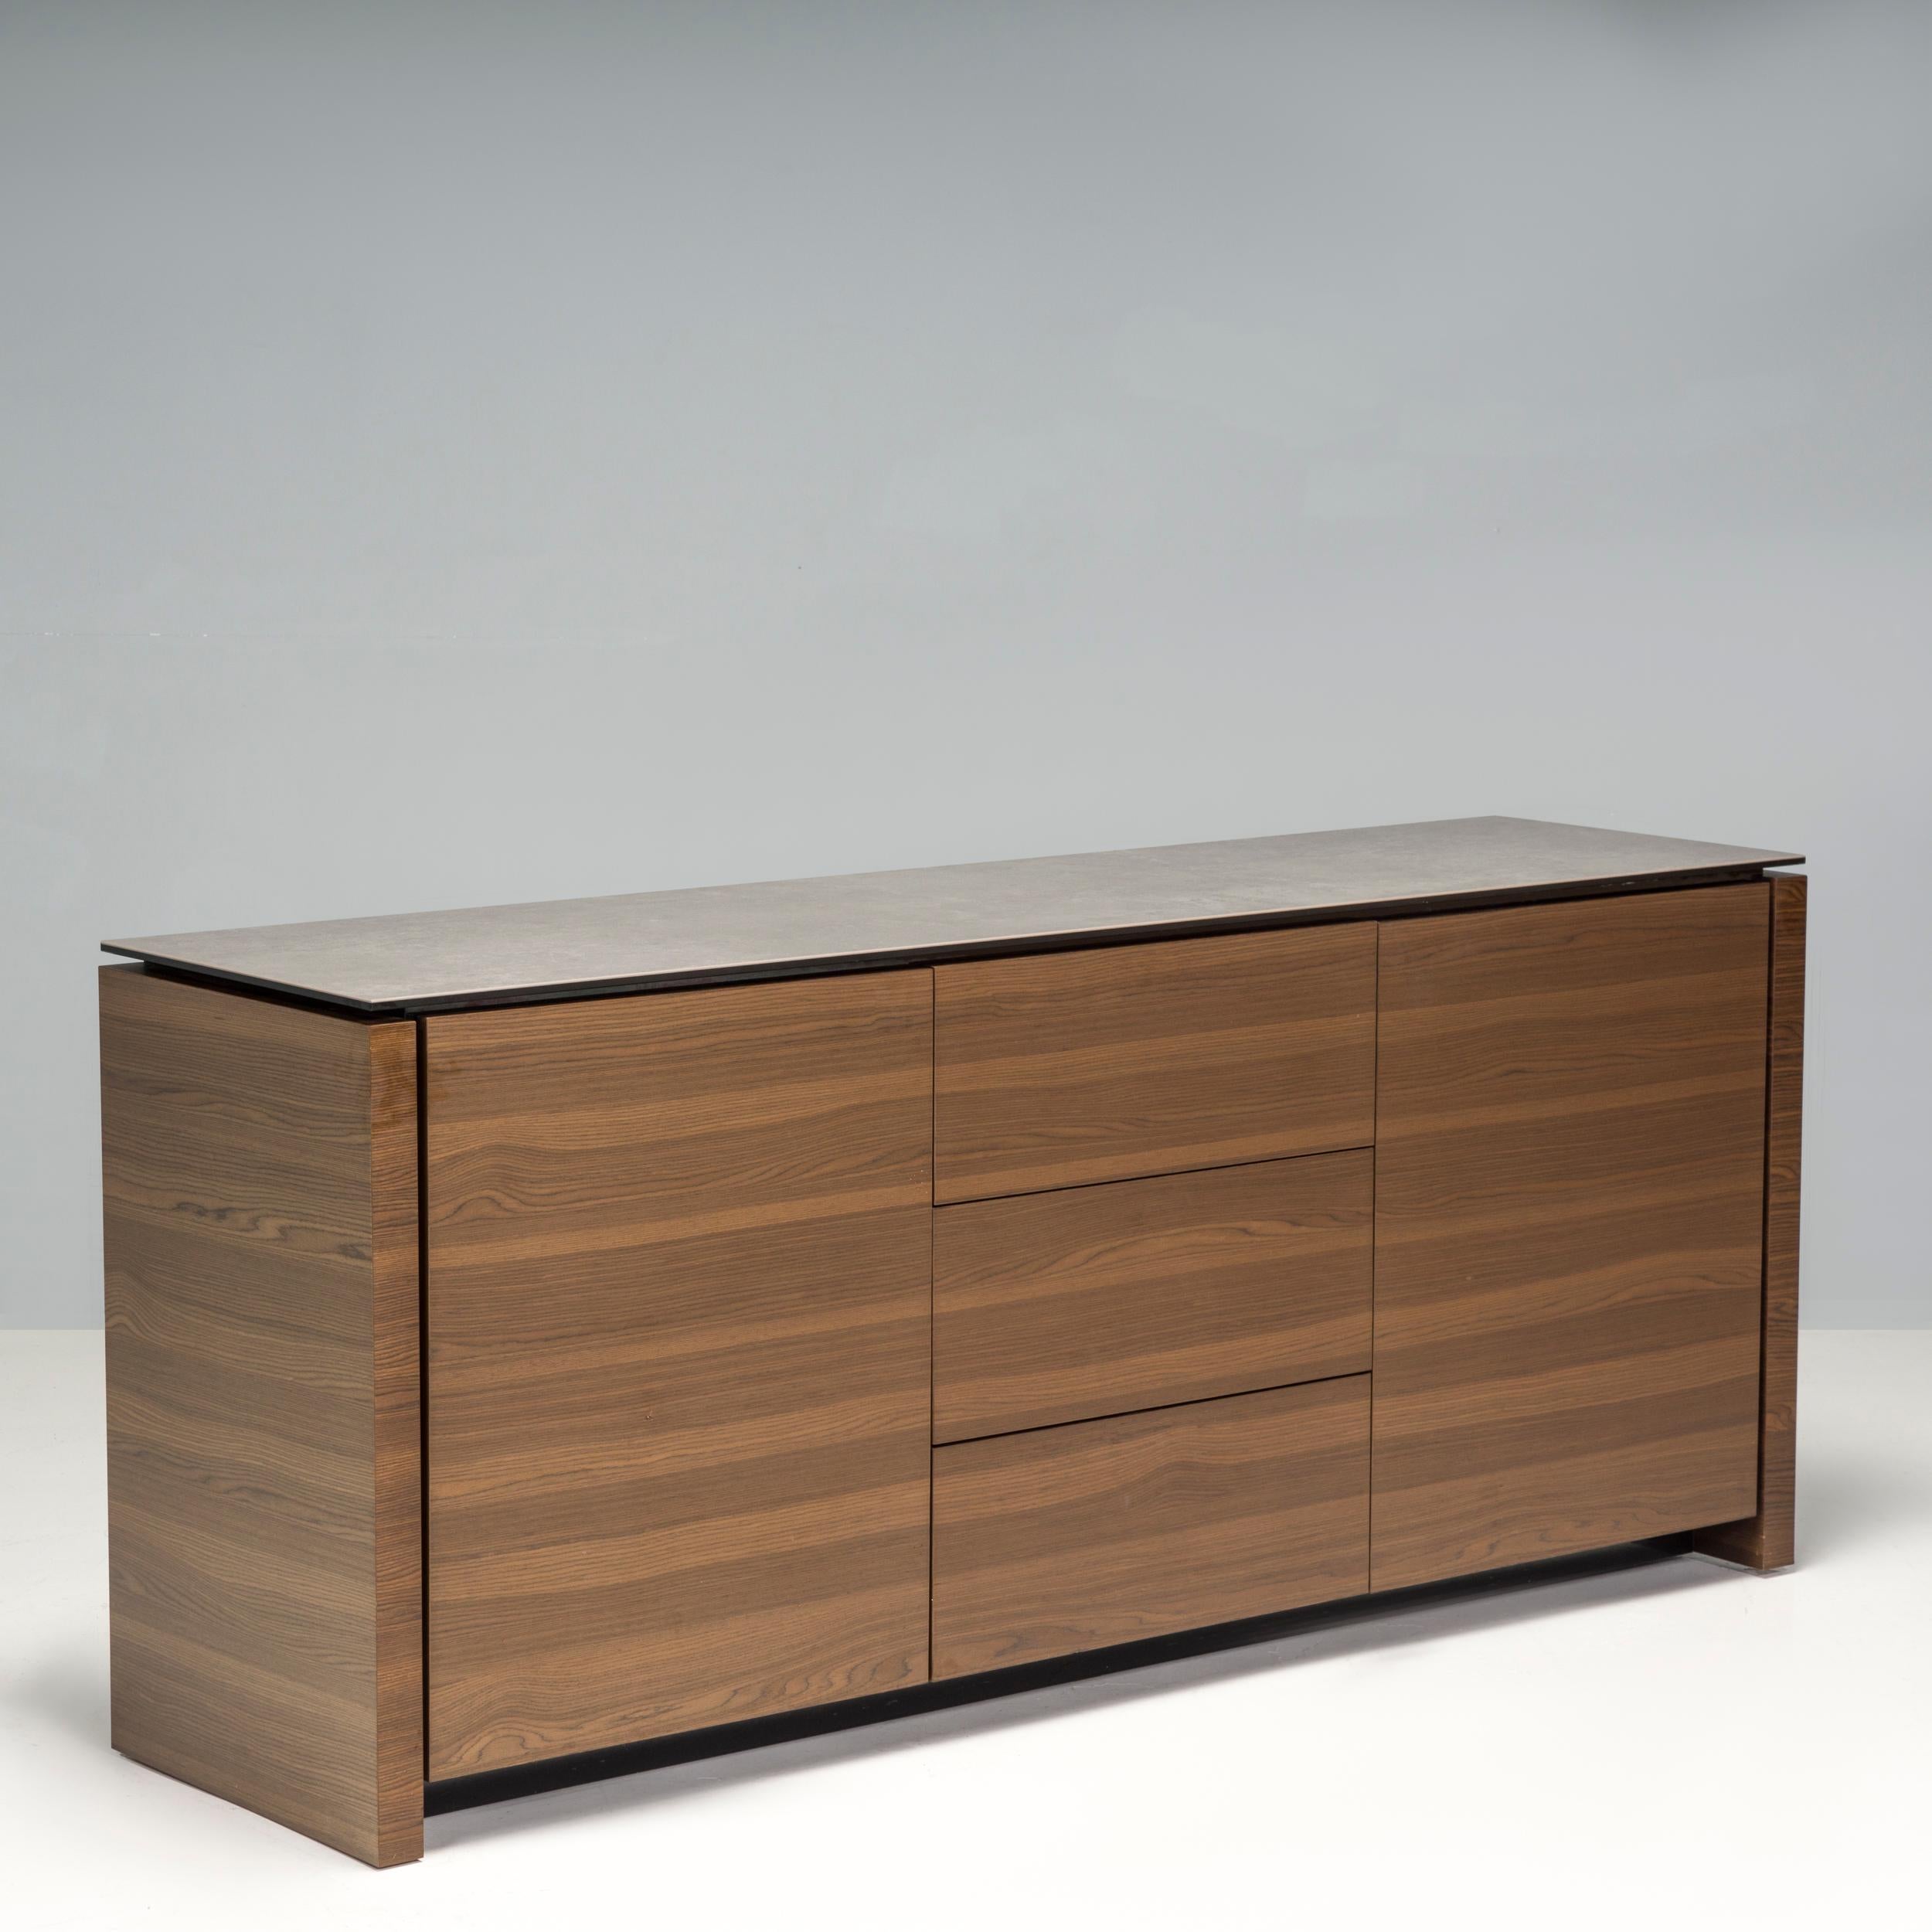 Designed and manufactured by Calligaris Studio, this Mag sideboard is a fantastic example of contemporary Italian design. Constructed from solid wood, the sideboard features separate compartments with a cupboard at each end and three drawers in the